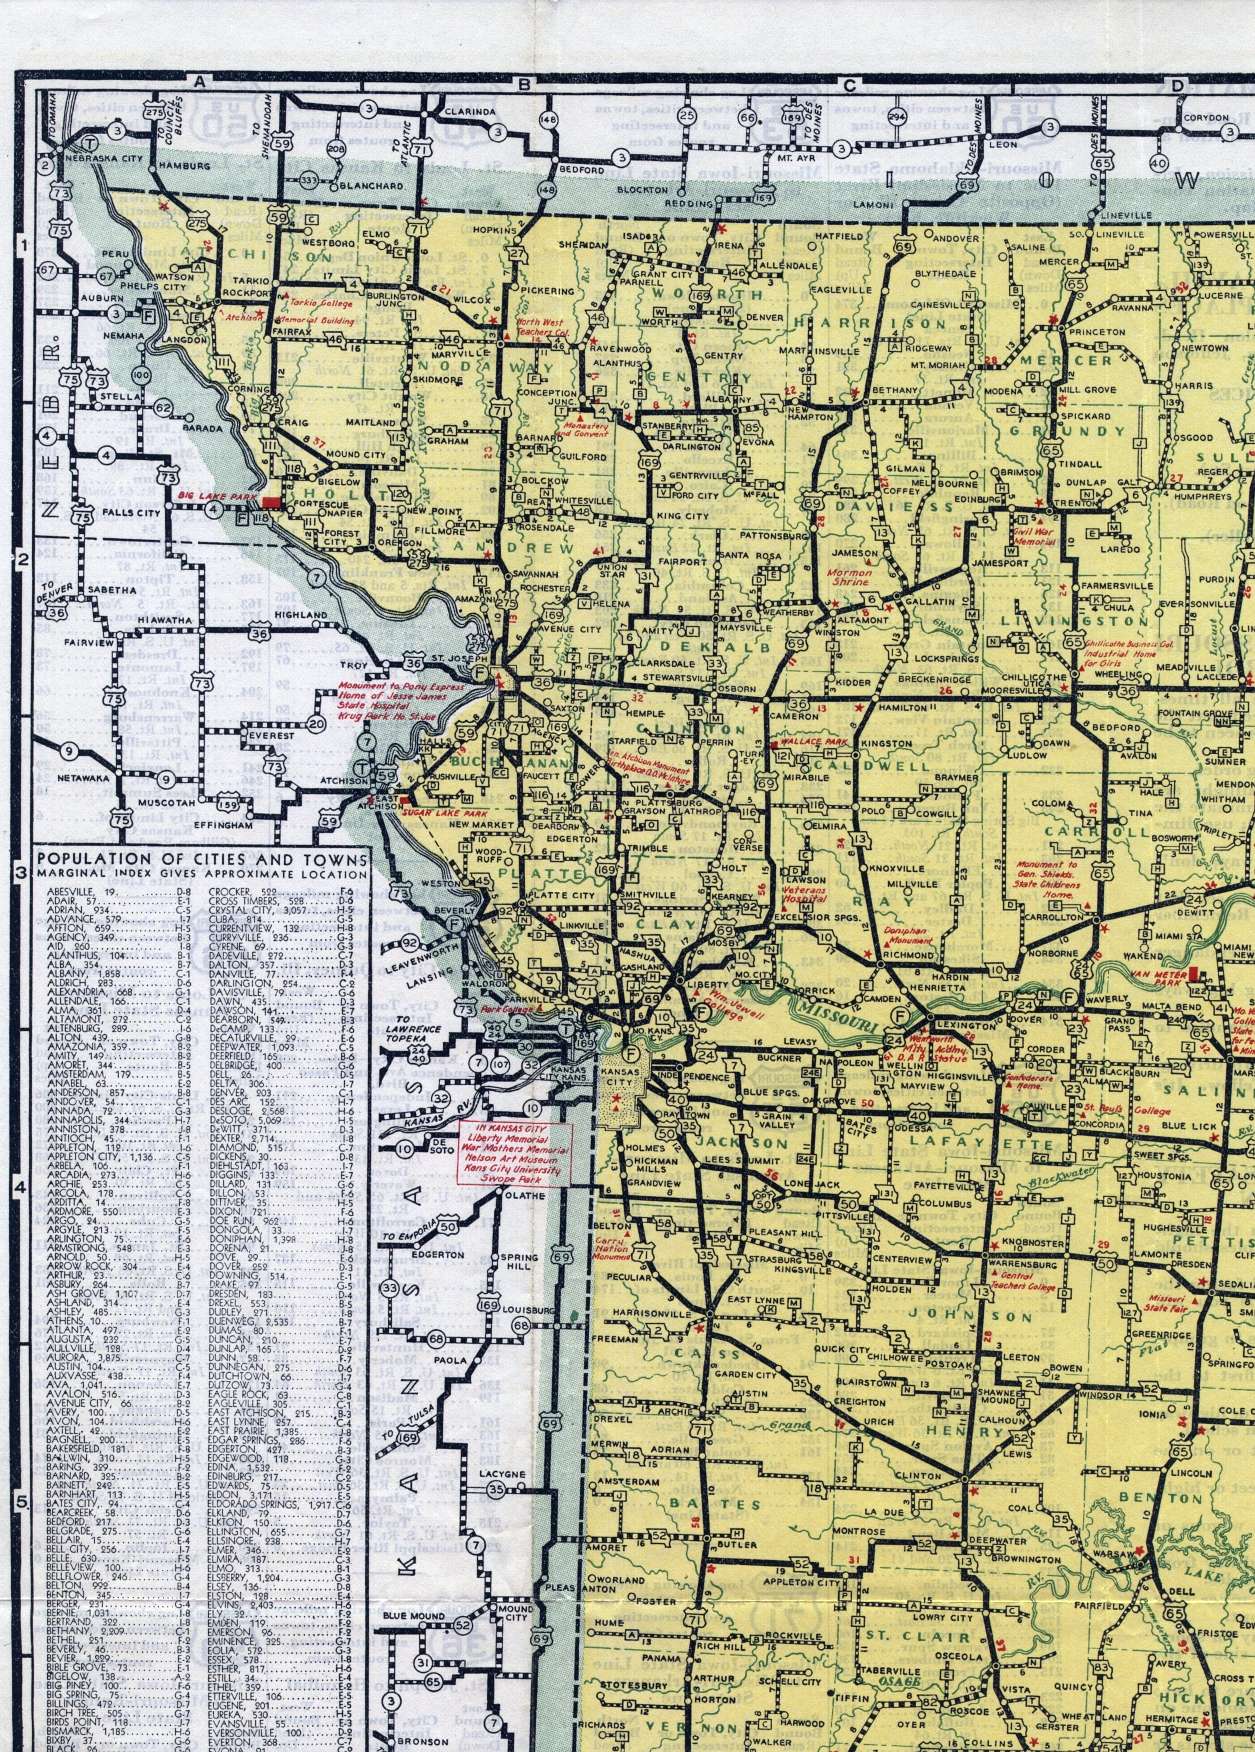 Section of 1938 official highway map for Missouri